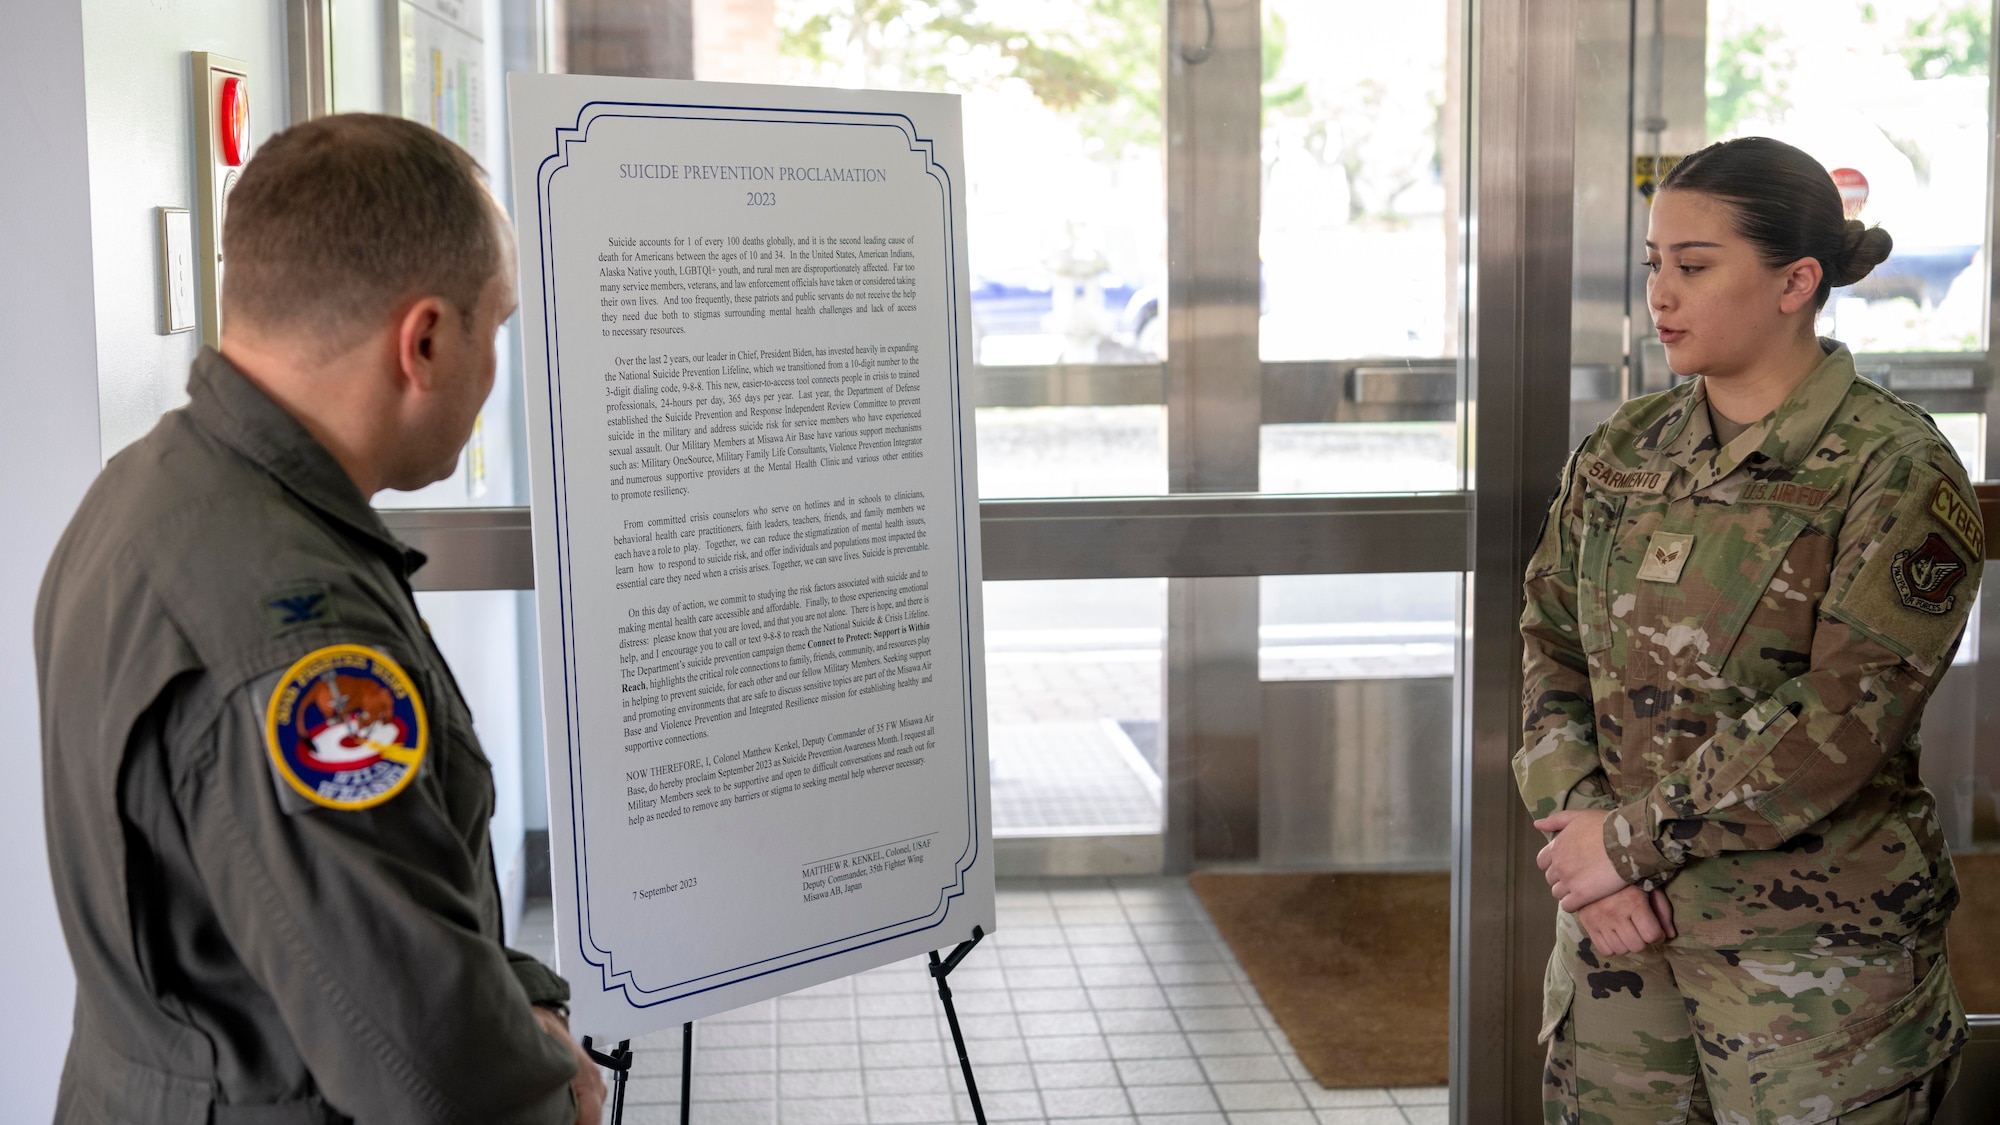 U.S. Air Force Senior Airman Joelle Sarmiento, 35th Fighter Wing suicide prevention facilitator, reads Misawa’s 2023 Suicide Prevention Proclamation as Col. Matthew Kenkel, 35th FW deputy commander, prepares to sign the proclamation at Misawa Air Base, Japan.